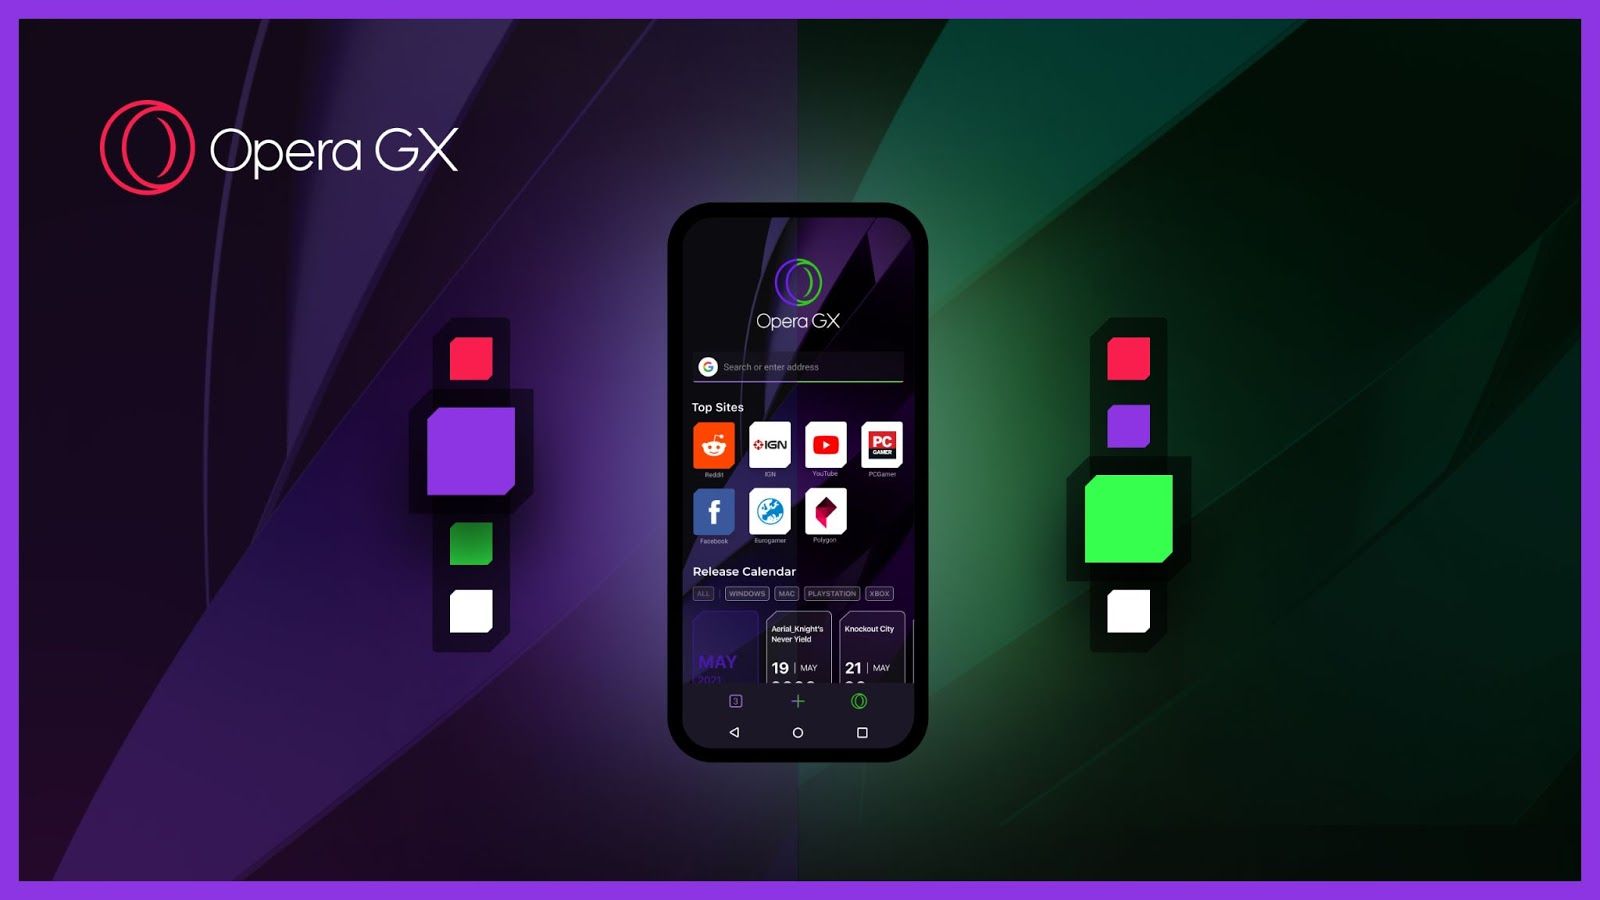 A gaming-focused Opera GX browser becomes available in beta for Android users